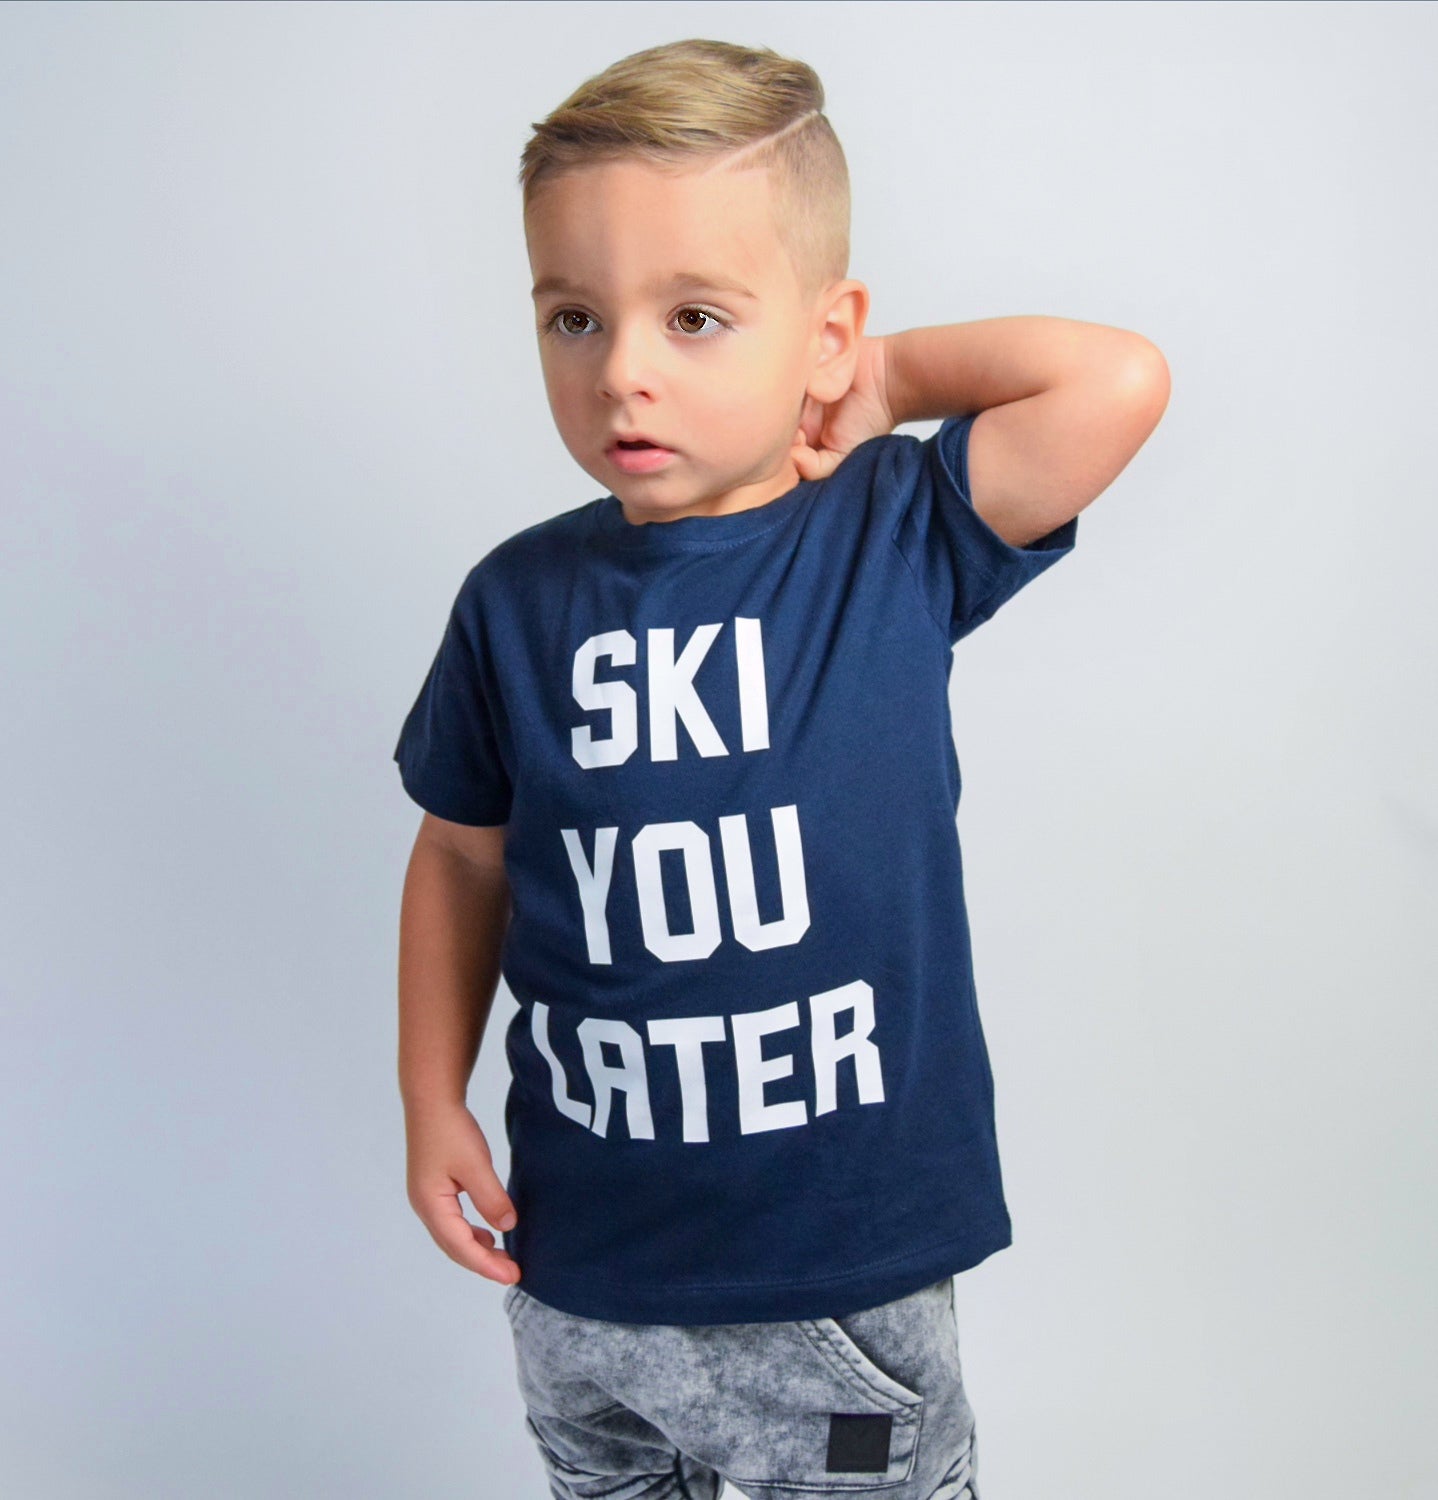 Boy wearing navy shirt with 'Ski je later' print by KMLeon, with hand in neck.